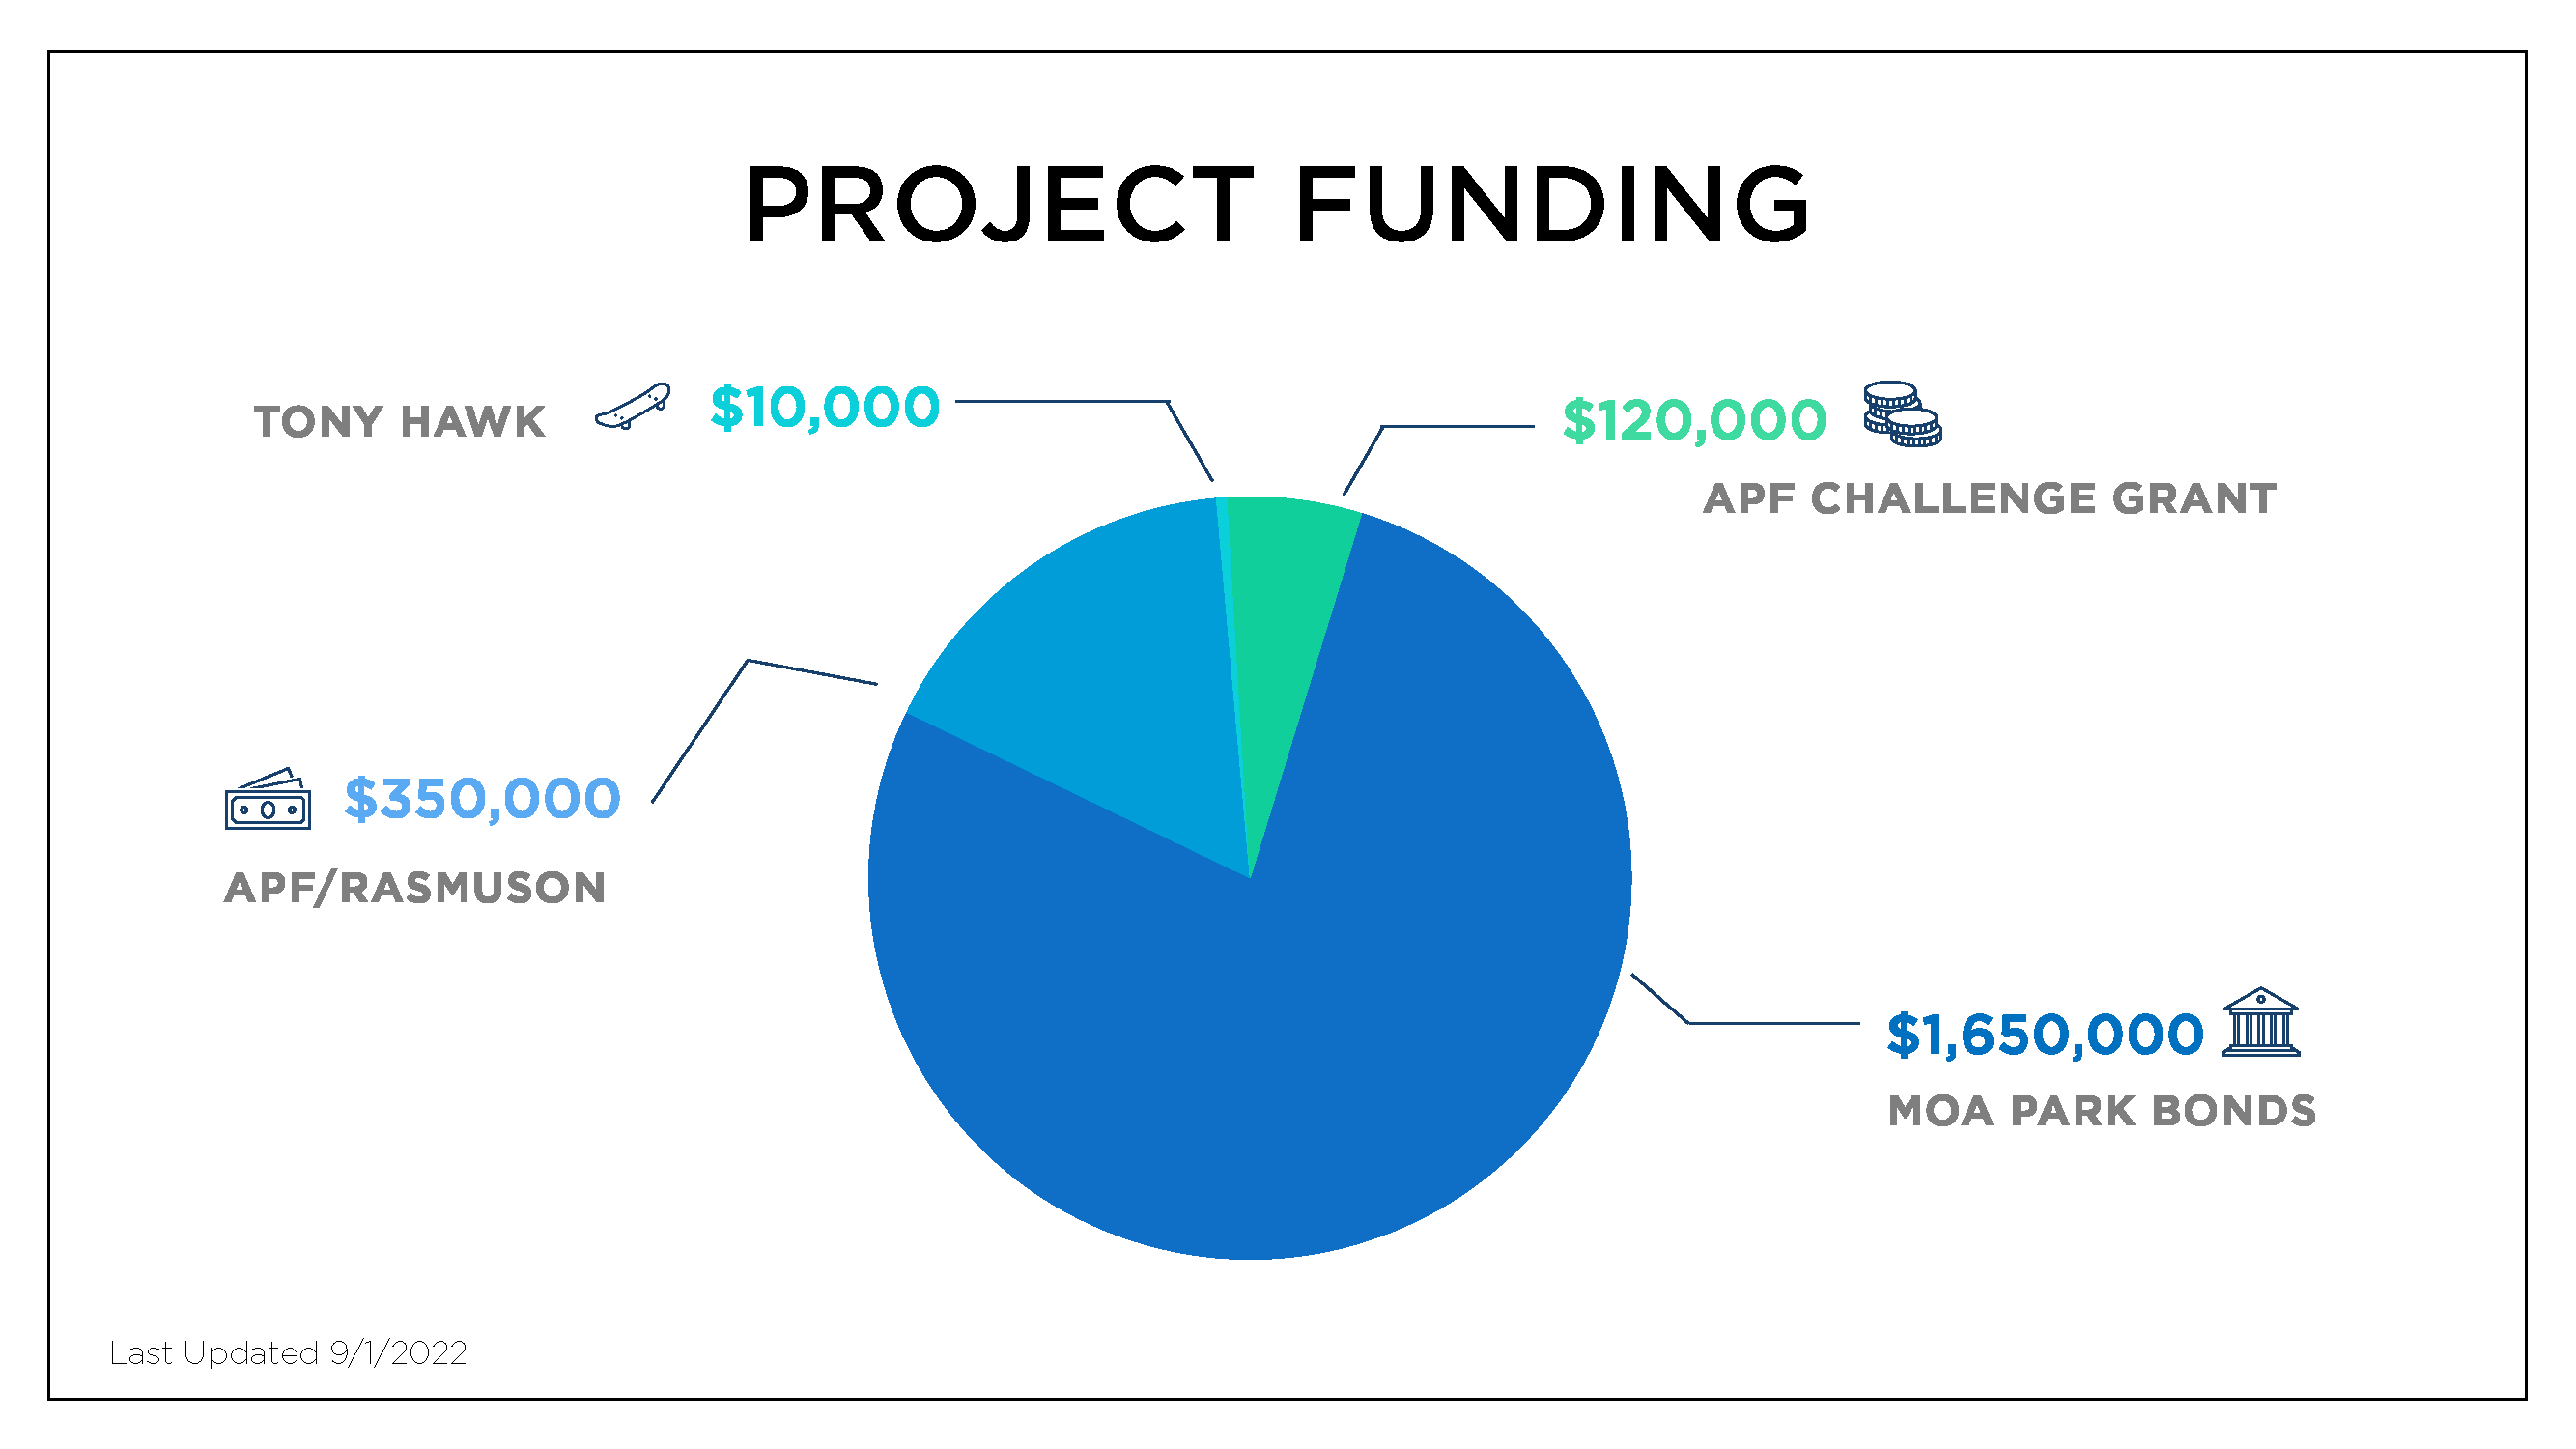 Project funding: 